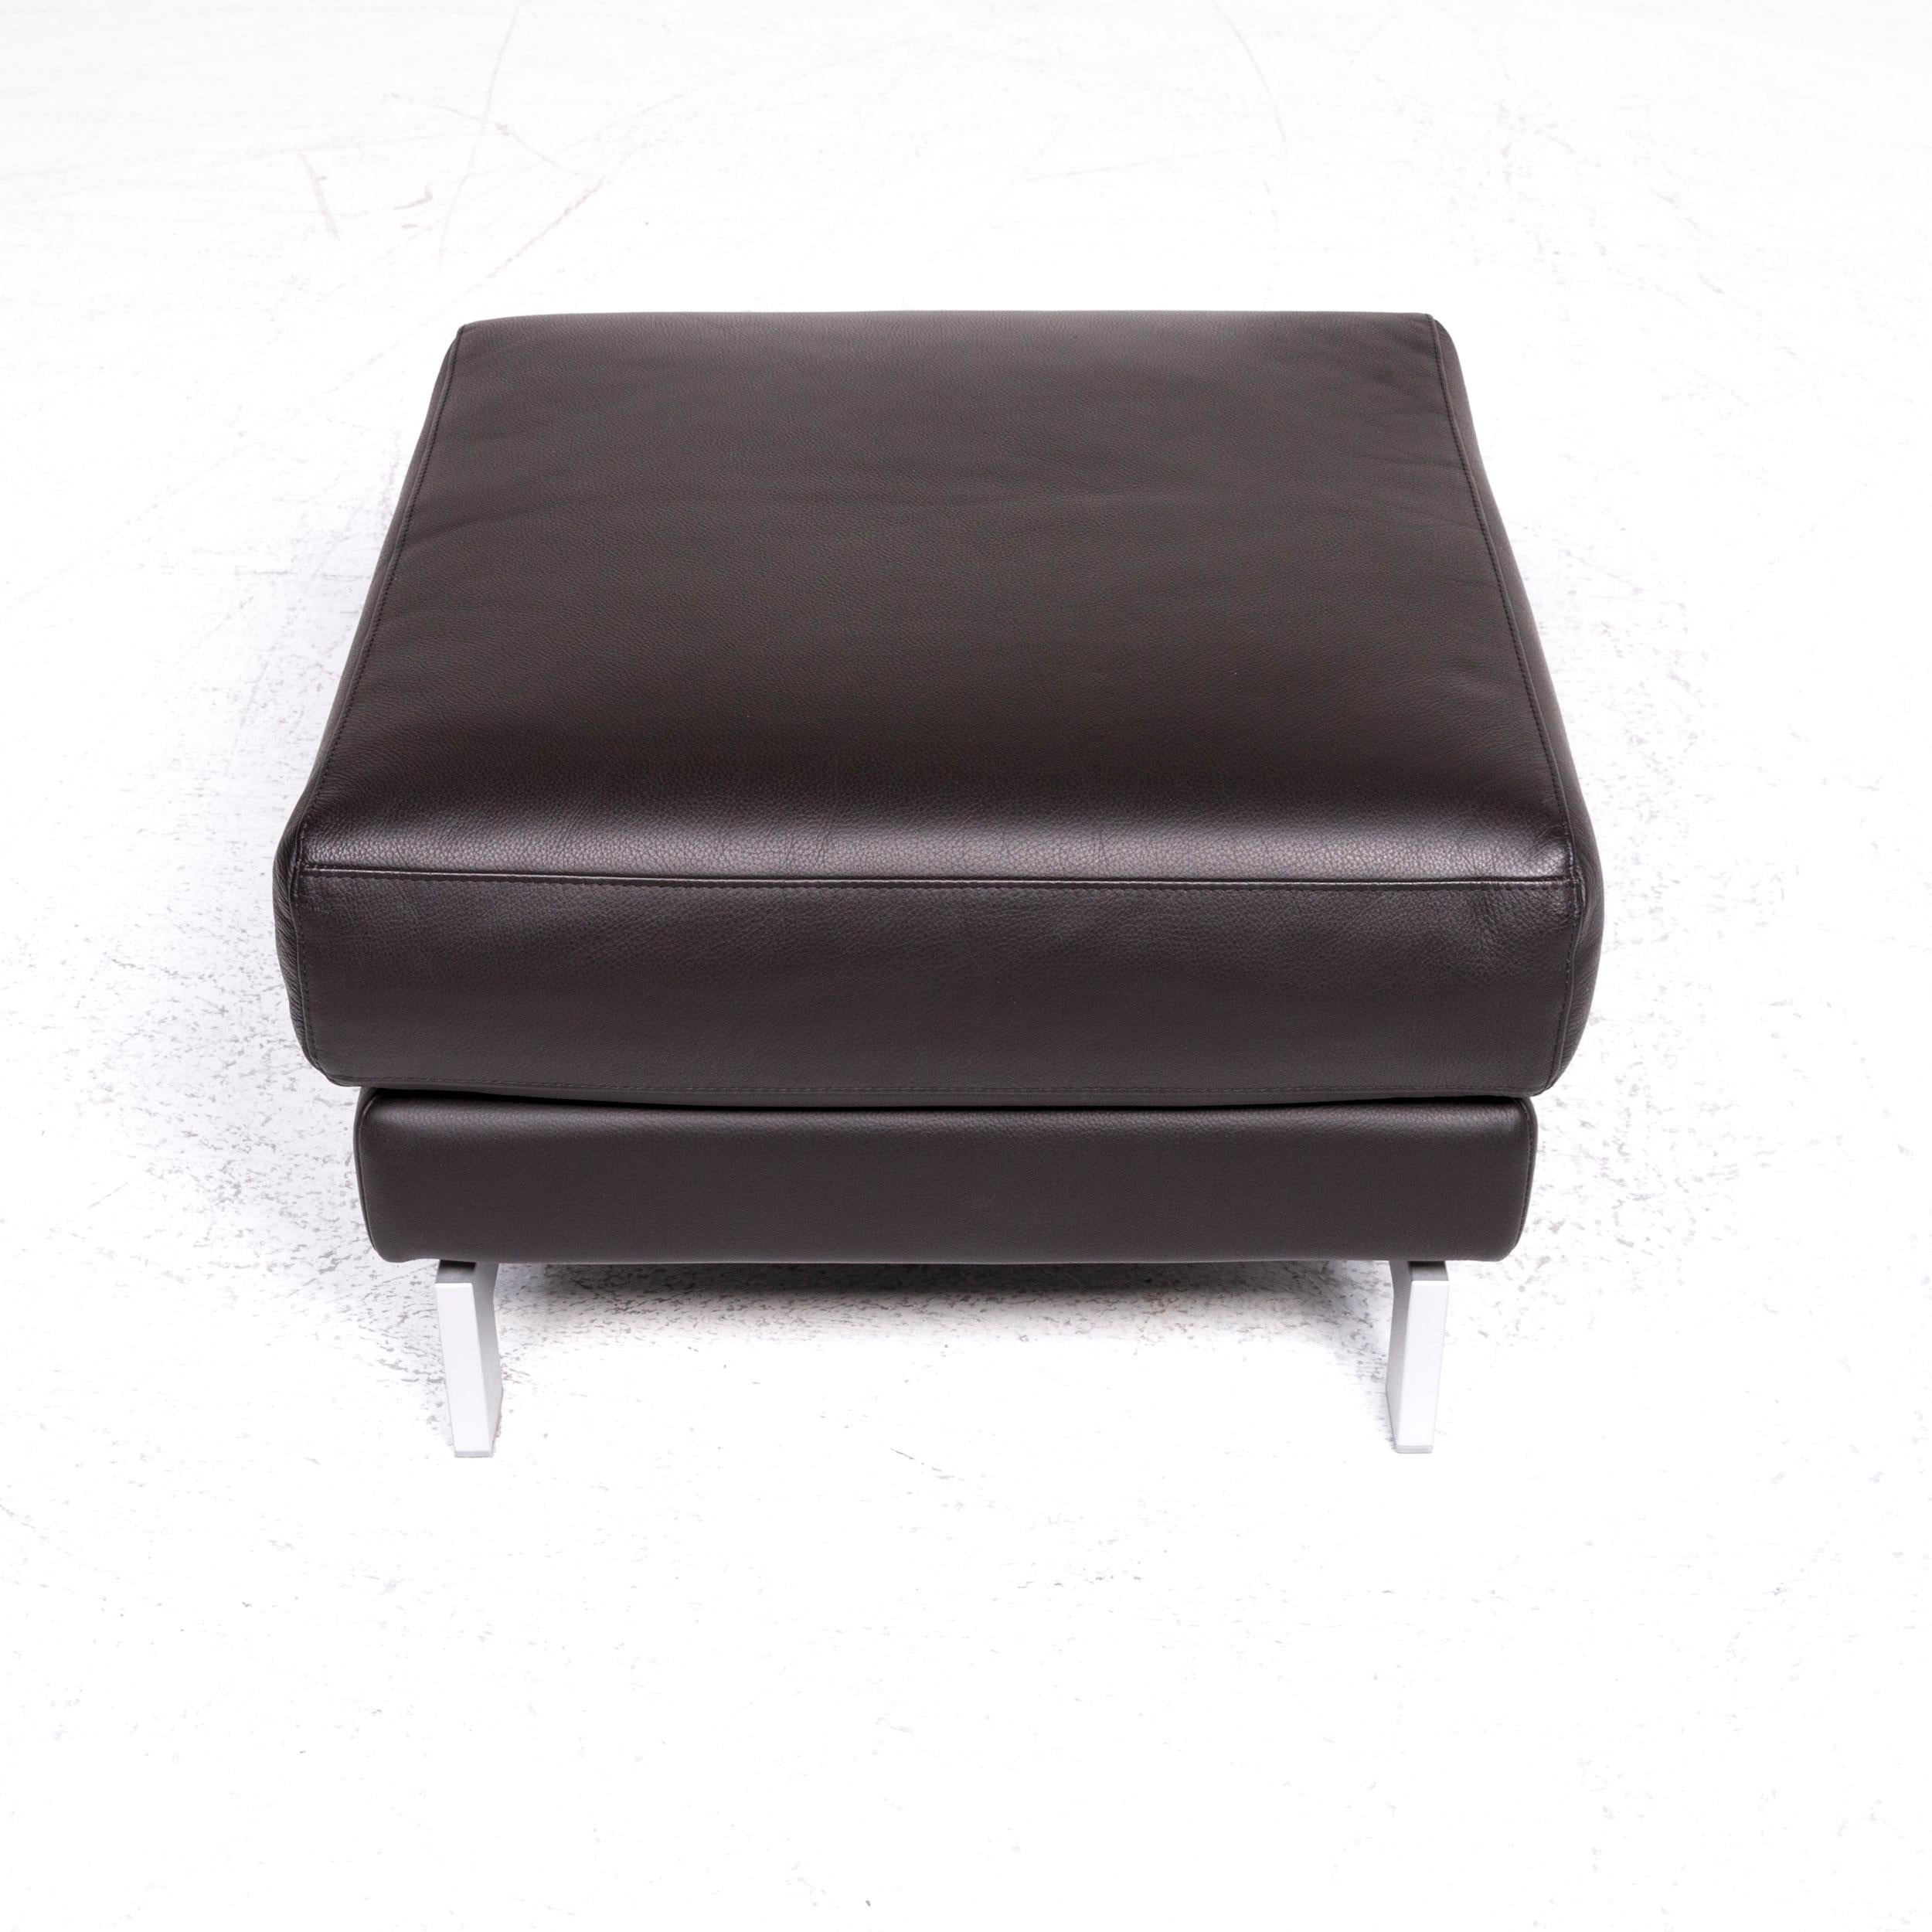 Contemporary Rolf Benz Vida Designer Leather Stool Brown Footstool For Sale